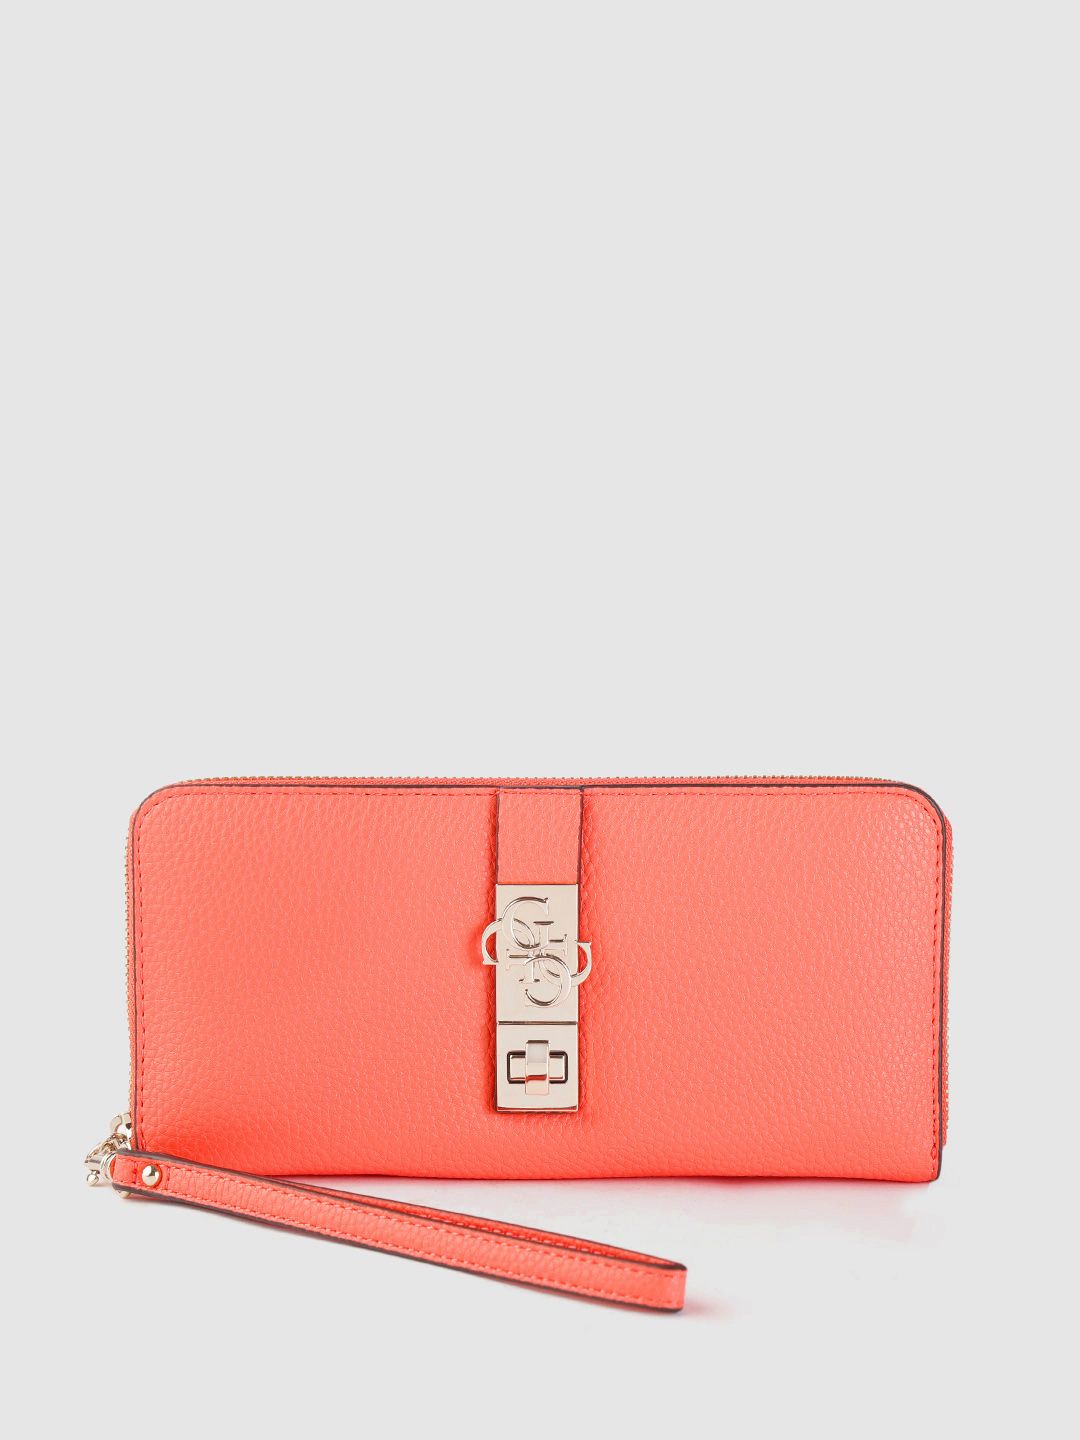 GUESS Women Coral Orange Solid Zip Around Wallet with Wrist Loop Price in India